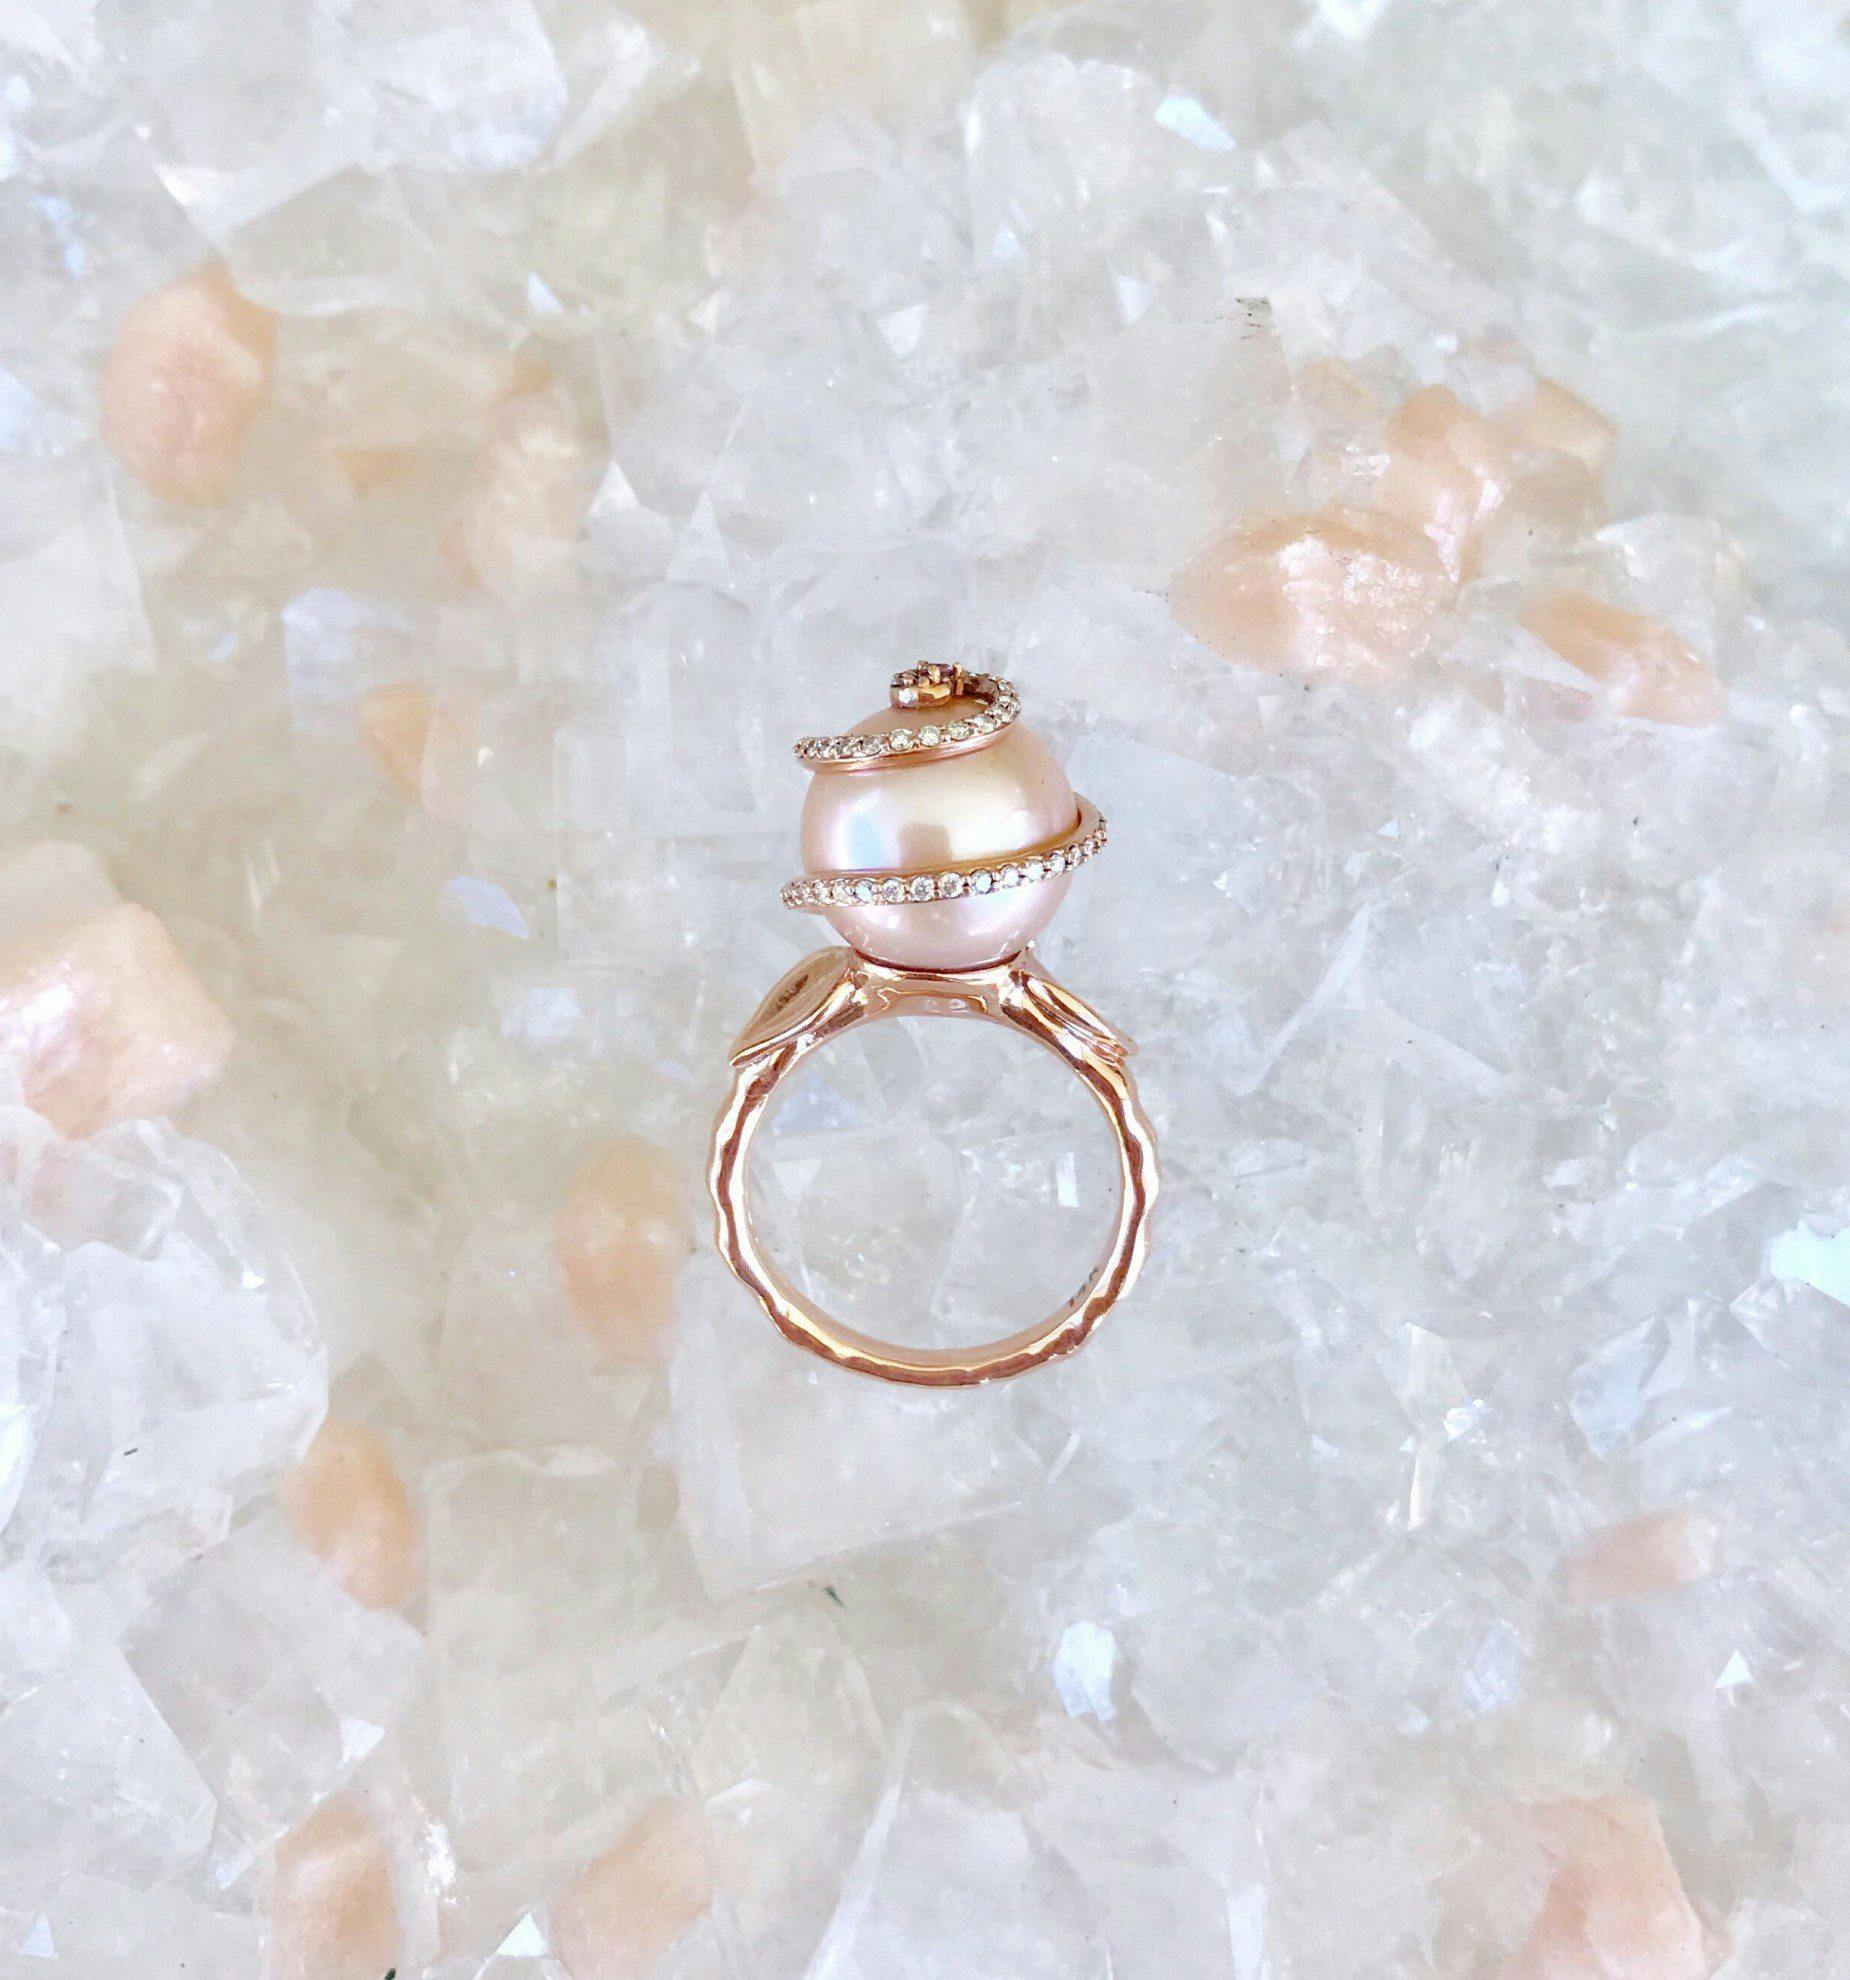 gem trends - rose gold and pearl ring